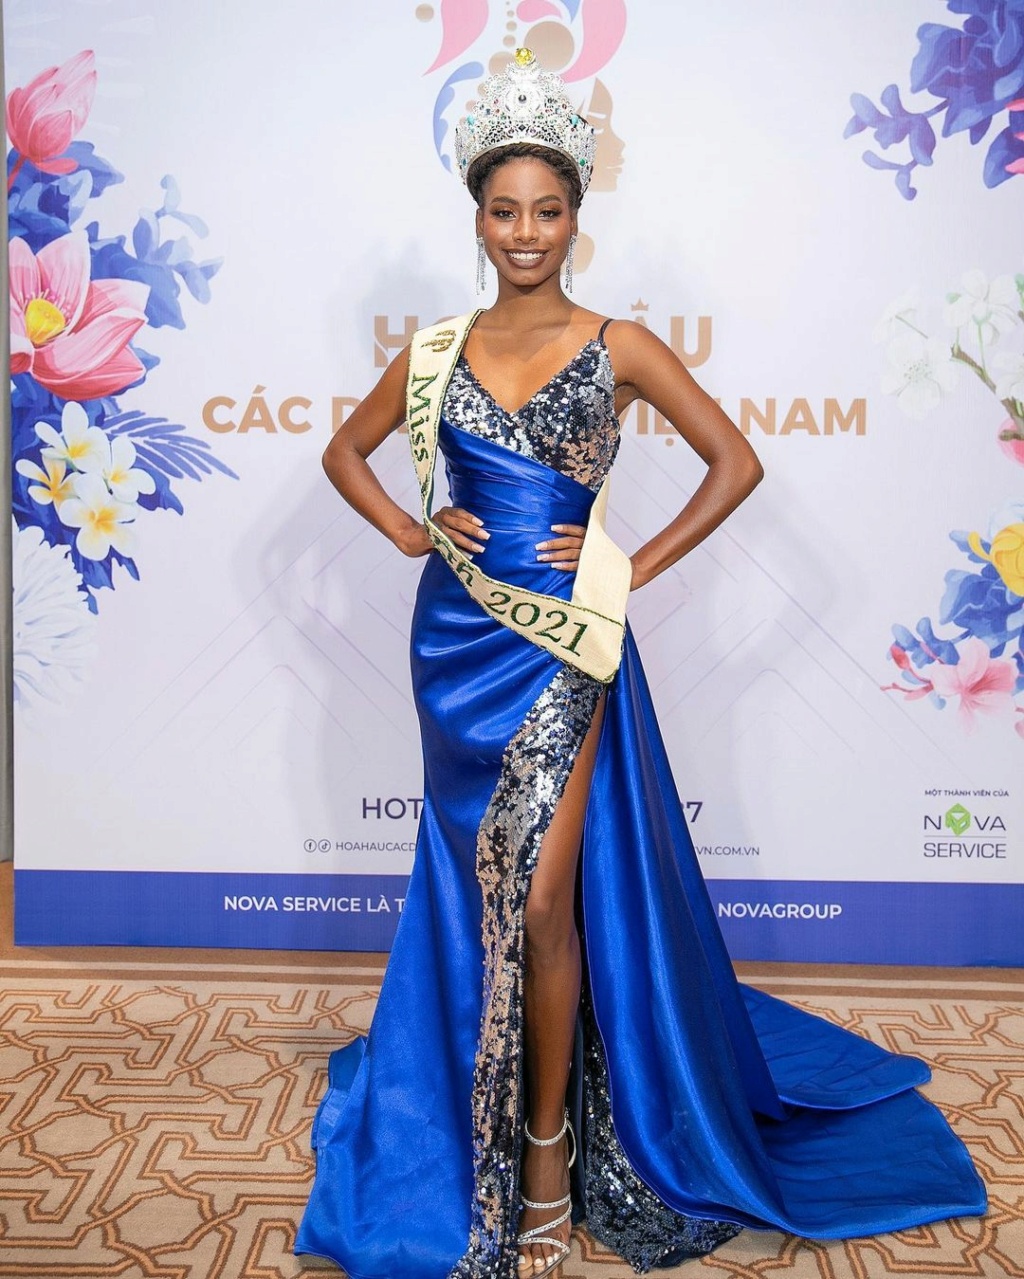 The Official Thread of MISS EARTH 2021: Destiny Wagner of Belize! - Page 3 27724110